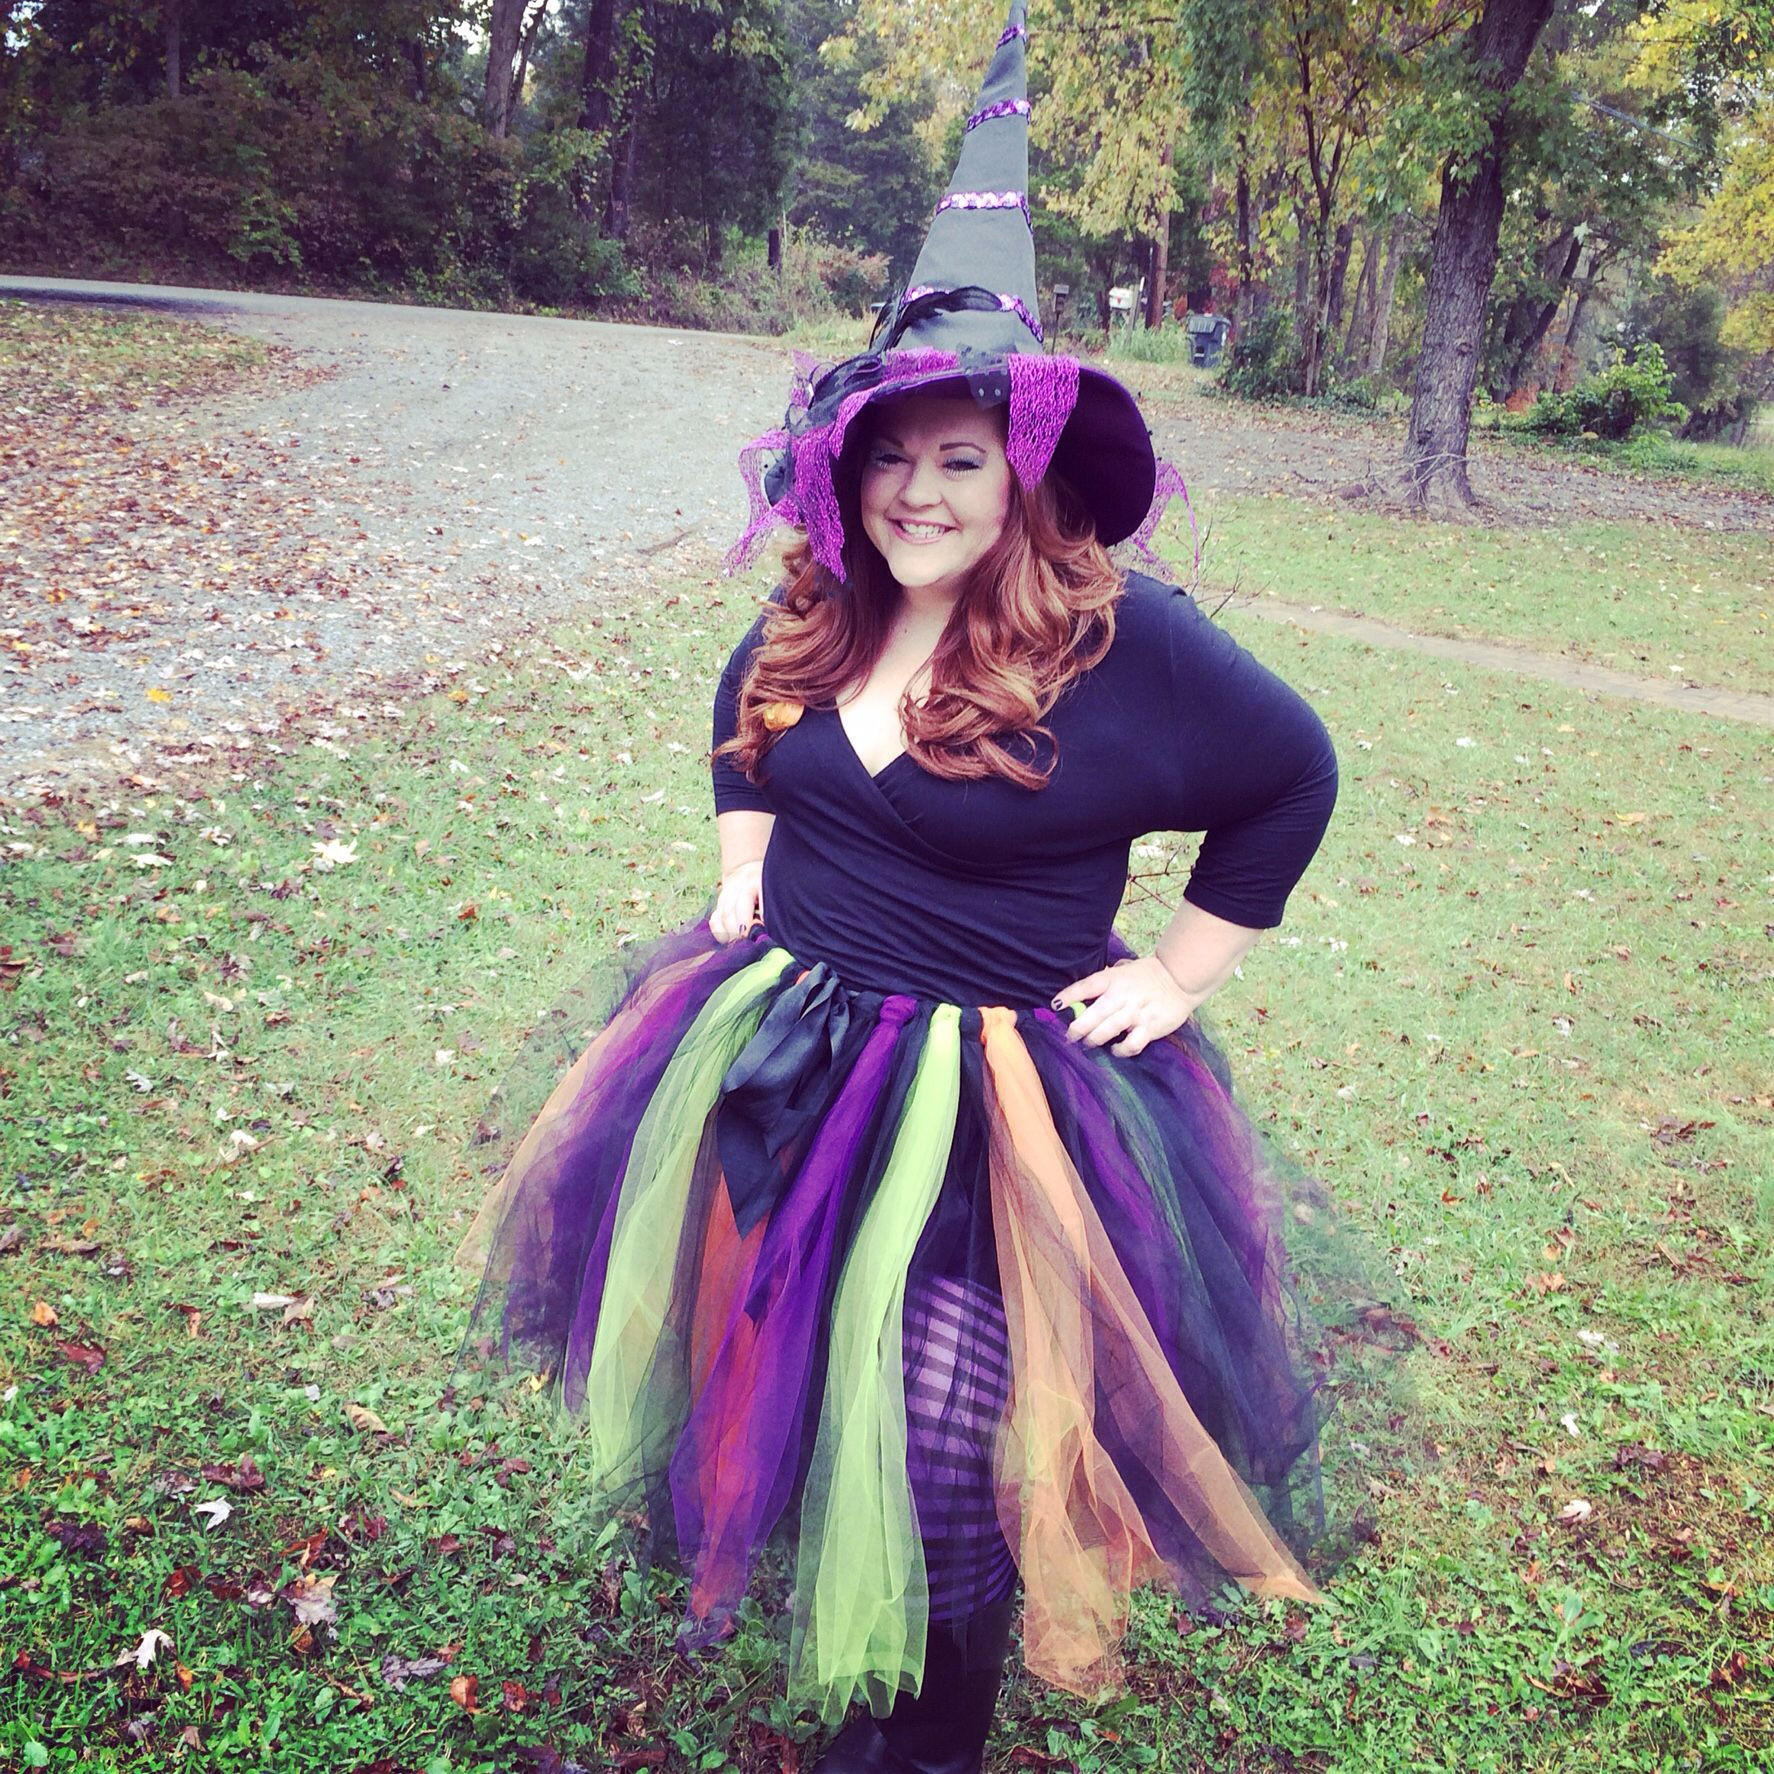 DIY Halloween Costumes With Tutus
 Halloween costume DIY Witch Hat Pier e $19 99 Tights